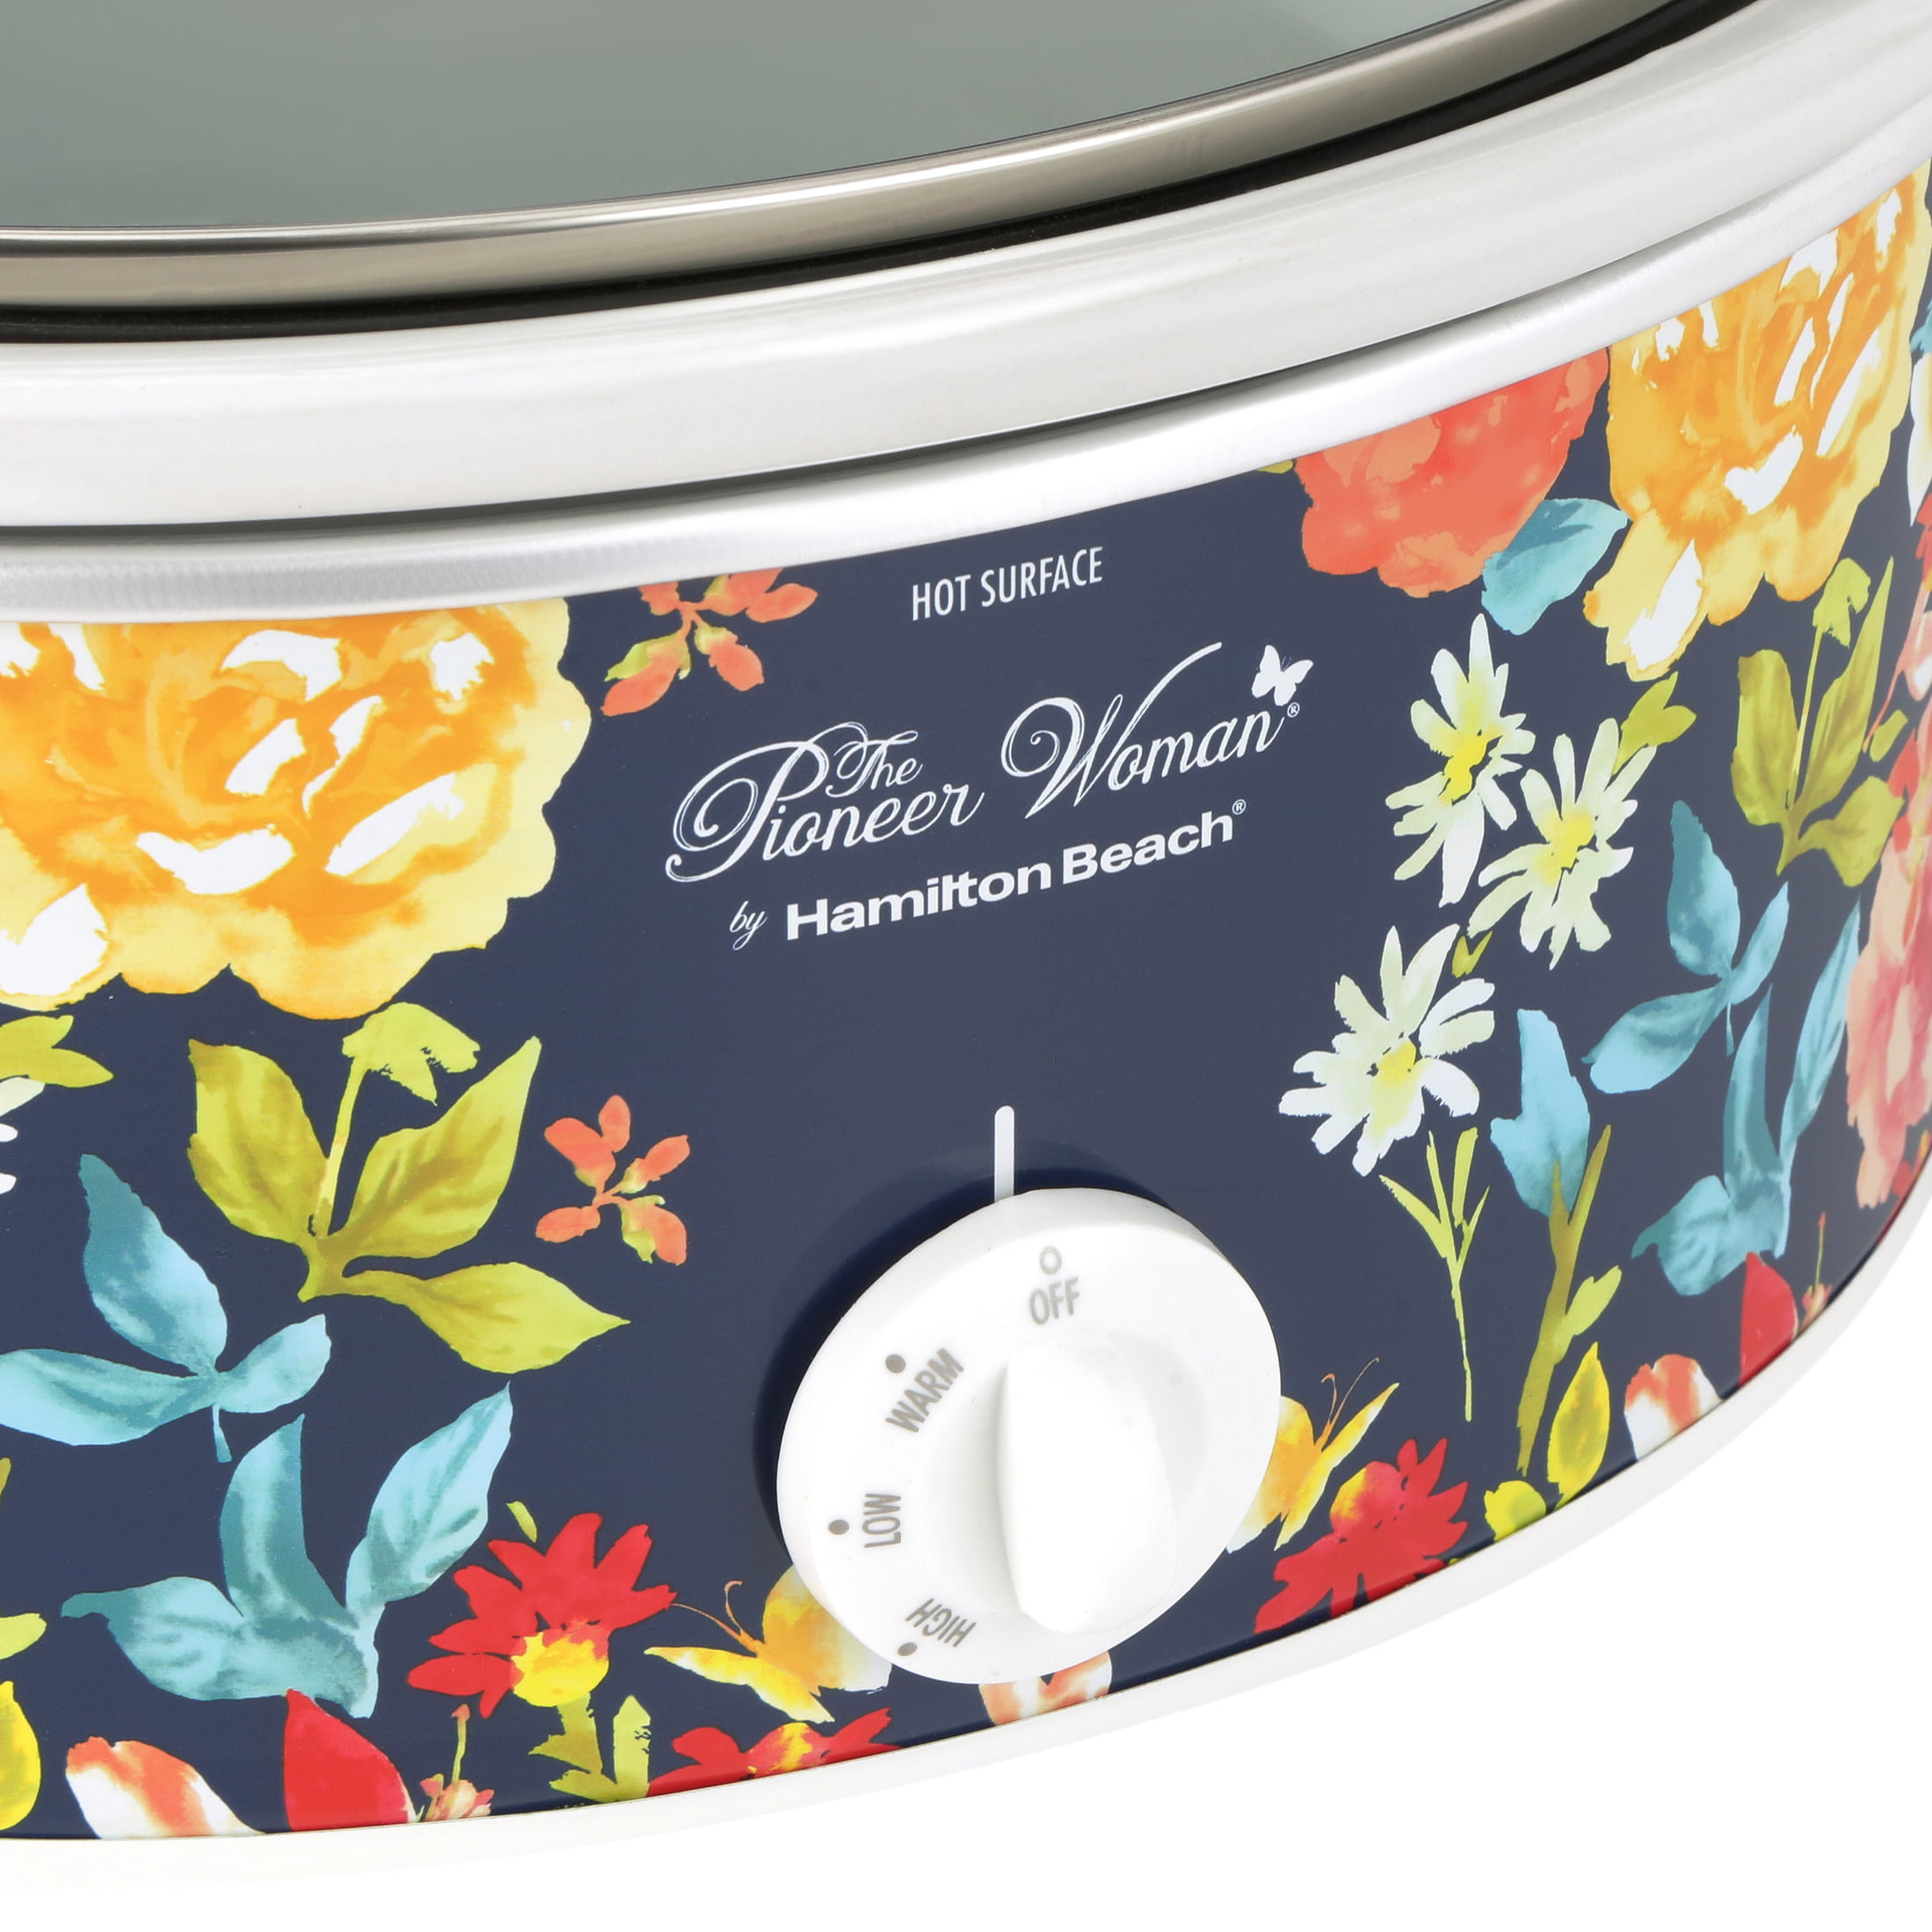 The Pioneer Woman Gorgeous Garden 6 Quart Portable Slow Cooker (33068N)